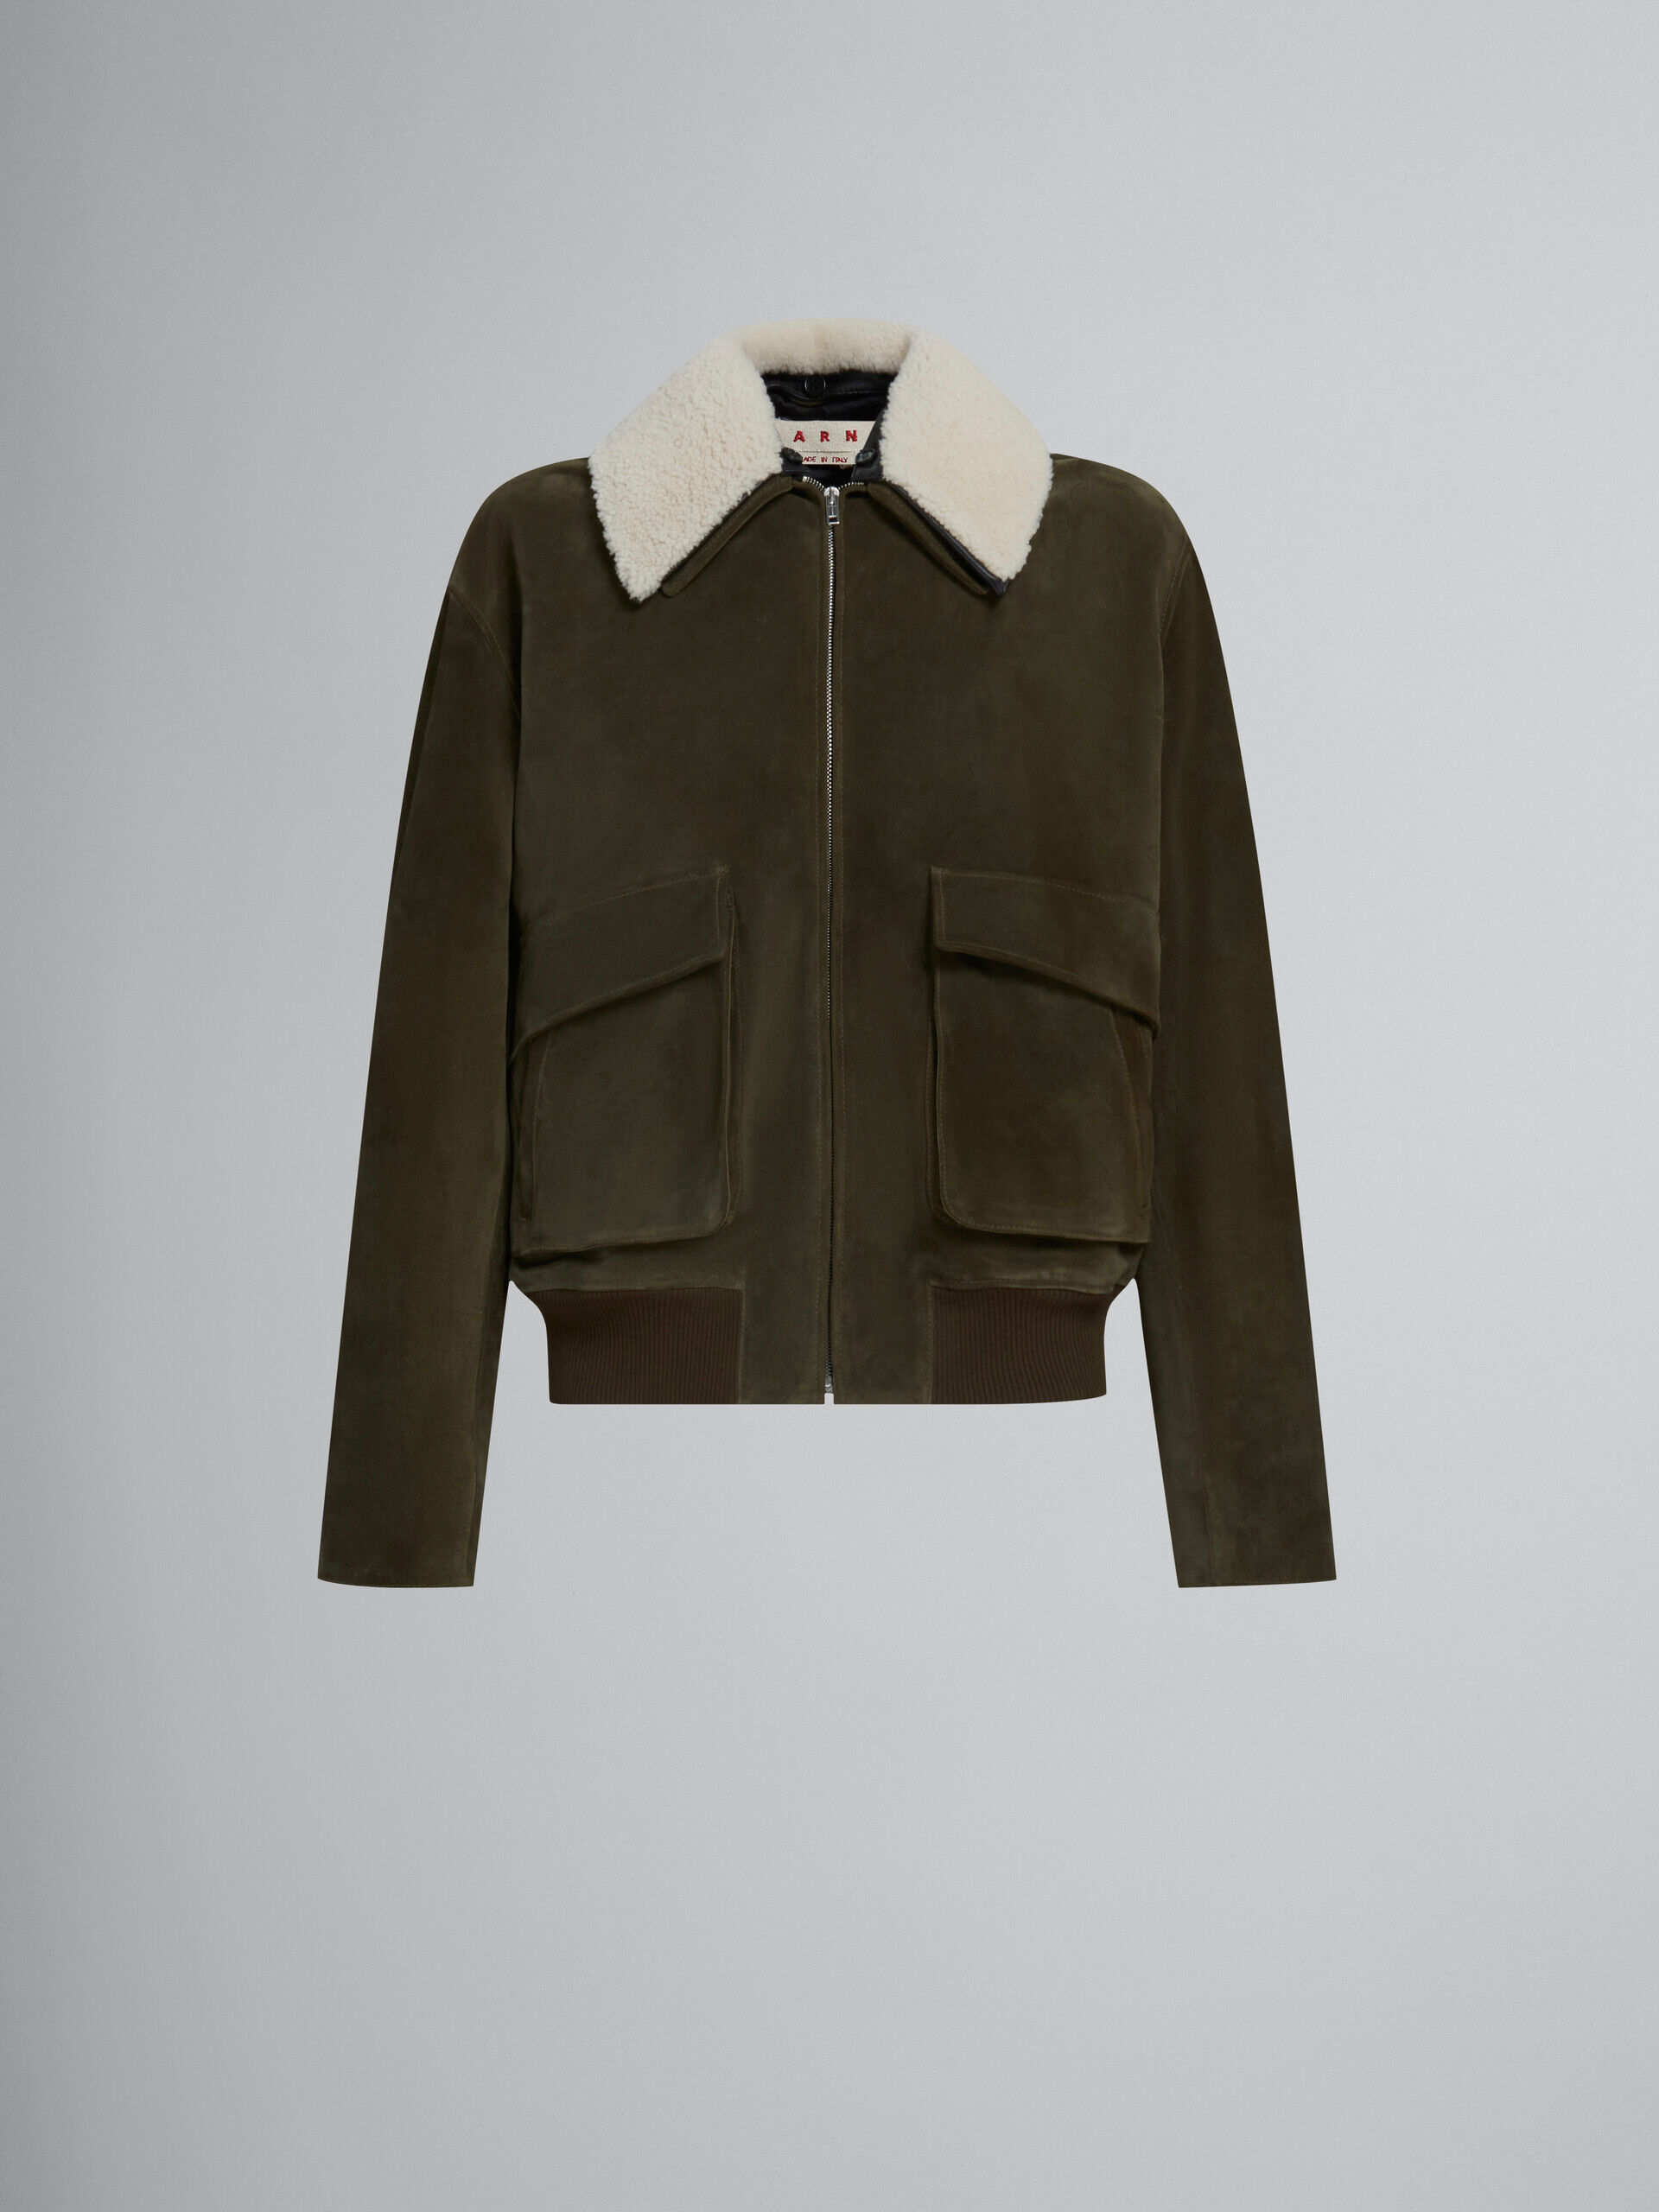 Green suede jacket with shearling collar | Marni